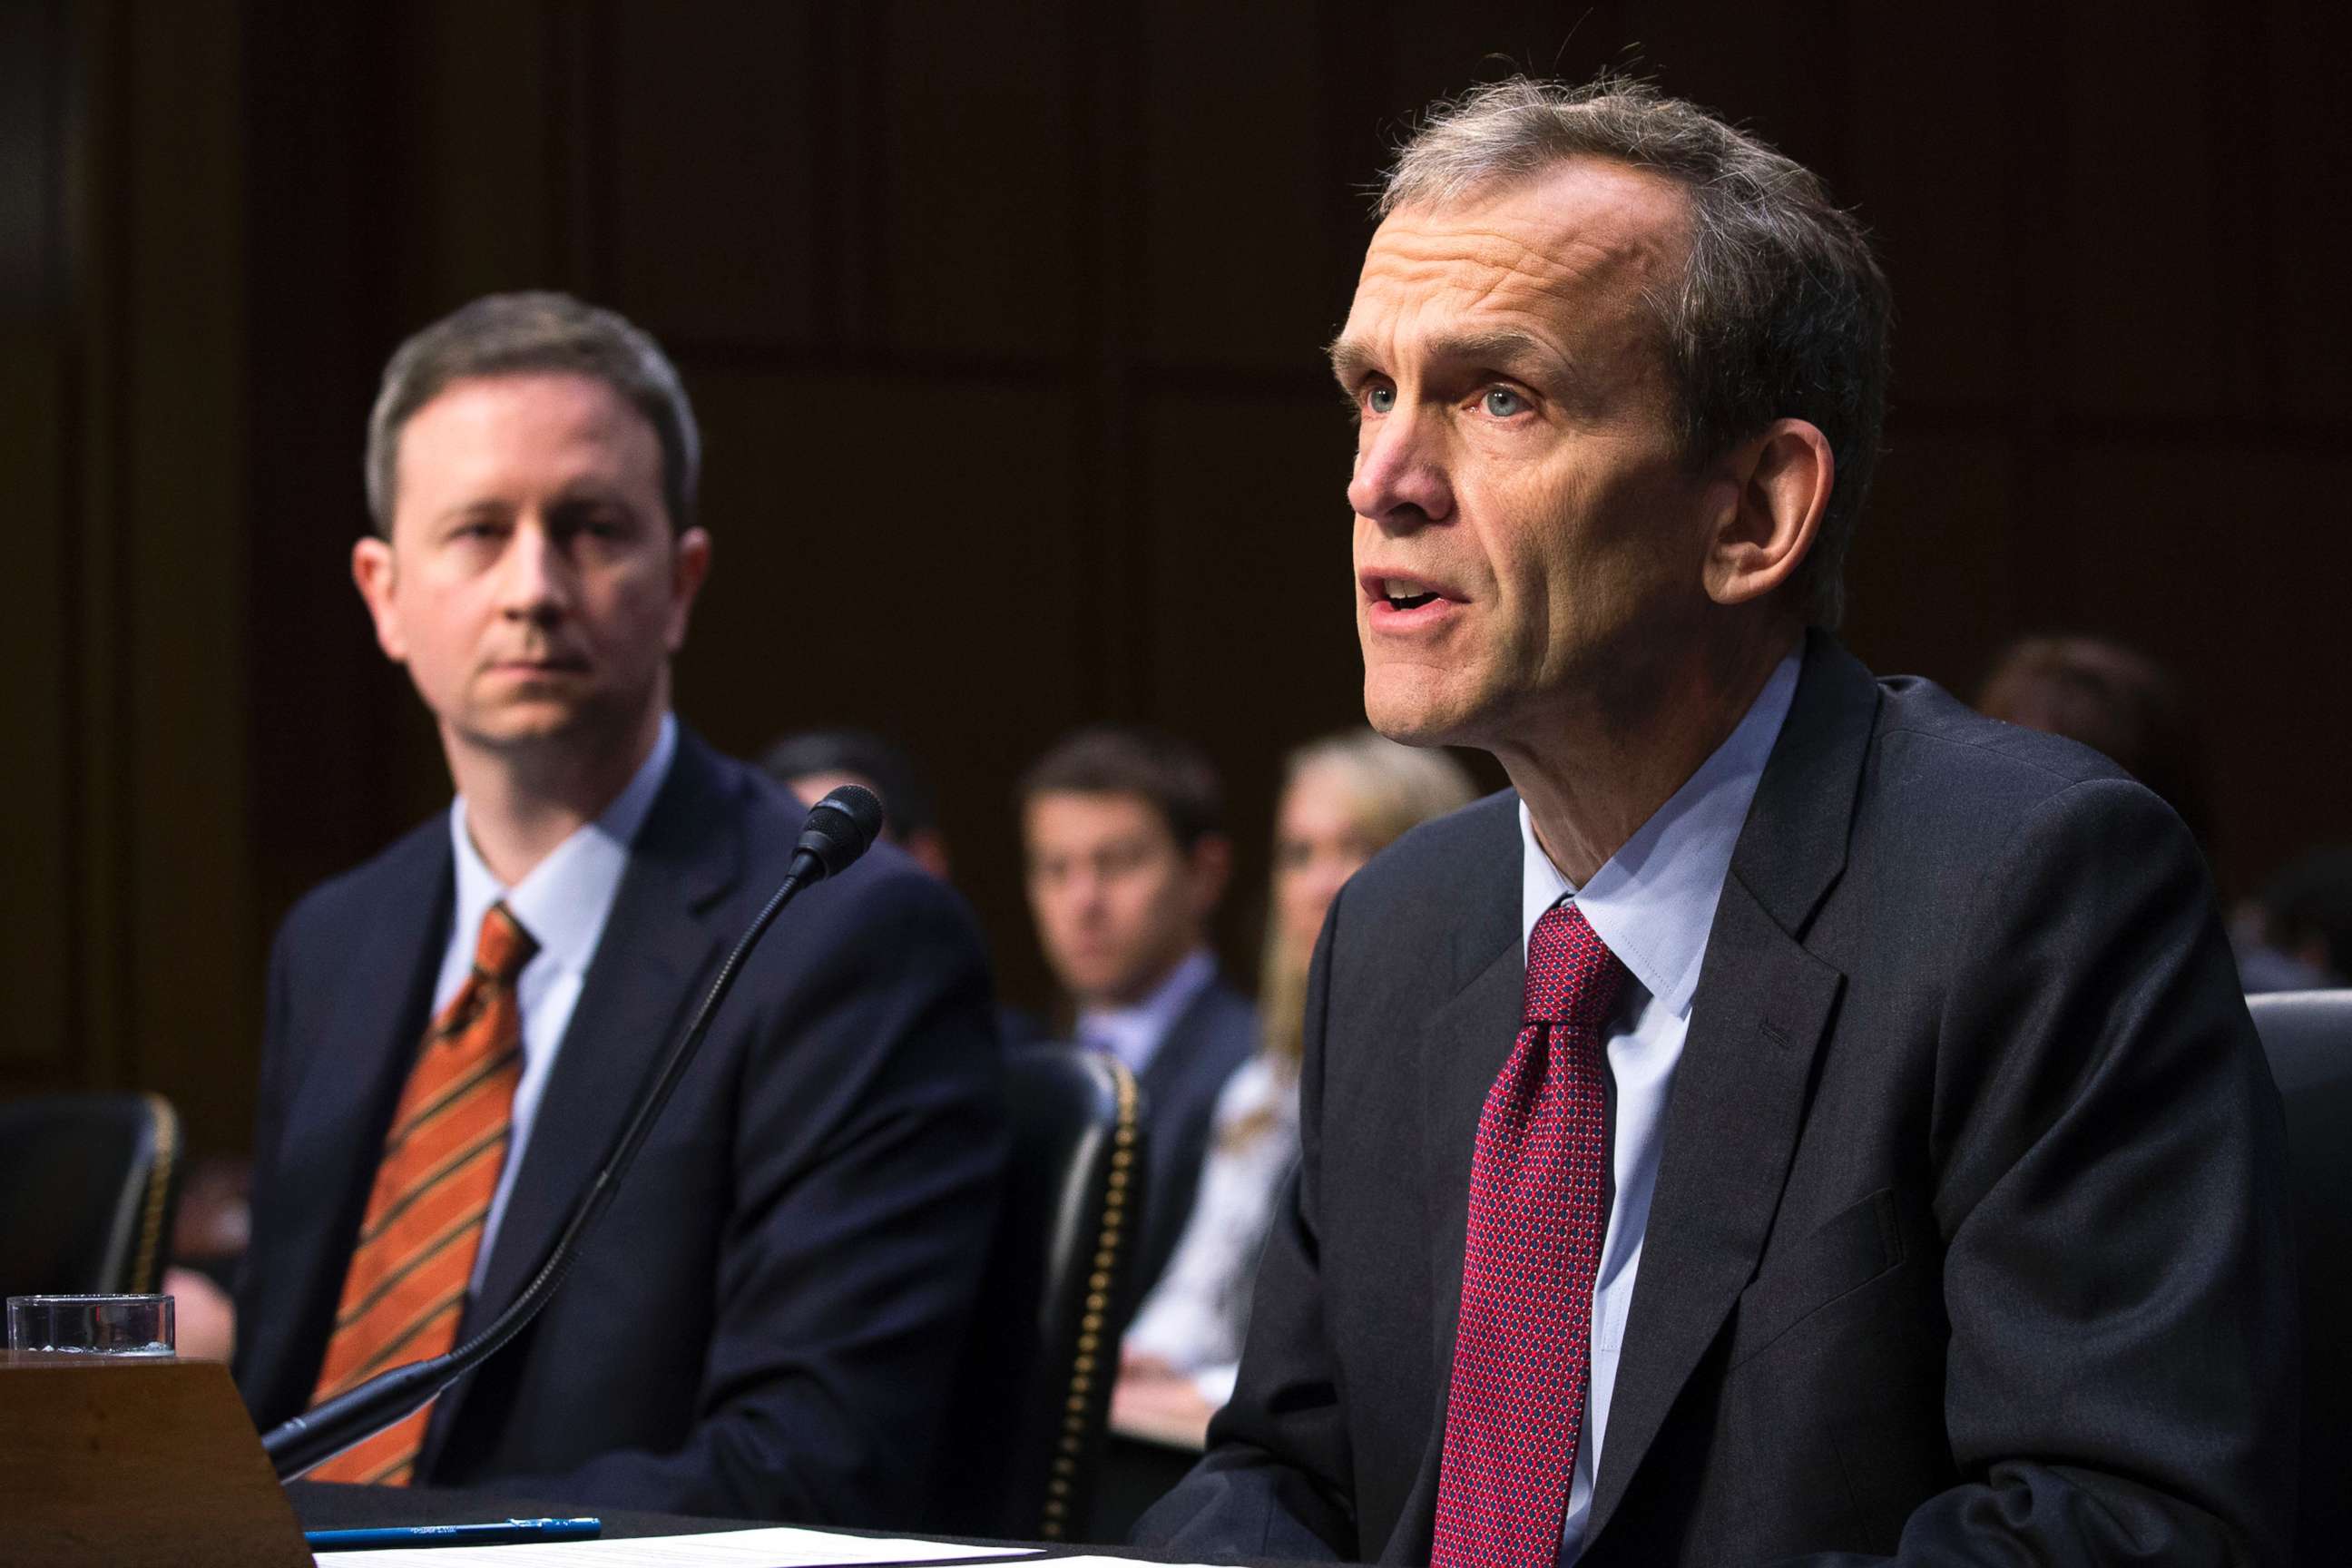 PHOTO: Kent Walker, right, Google senior vice president and general counsel, with Colin Stretch, Facebook general counsel, testifies during a hearing on 'the social media influence in the 2016 U.S. elections, in Washington, D.C., Nov. 1, 2017.  